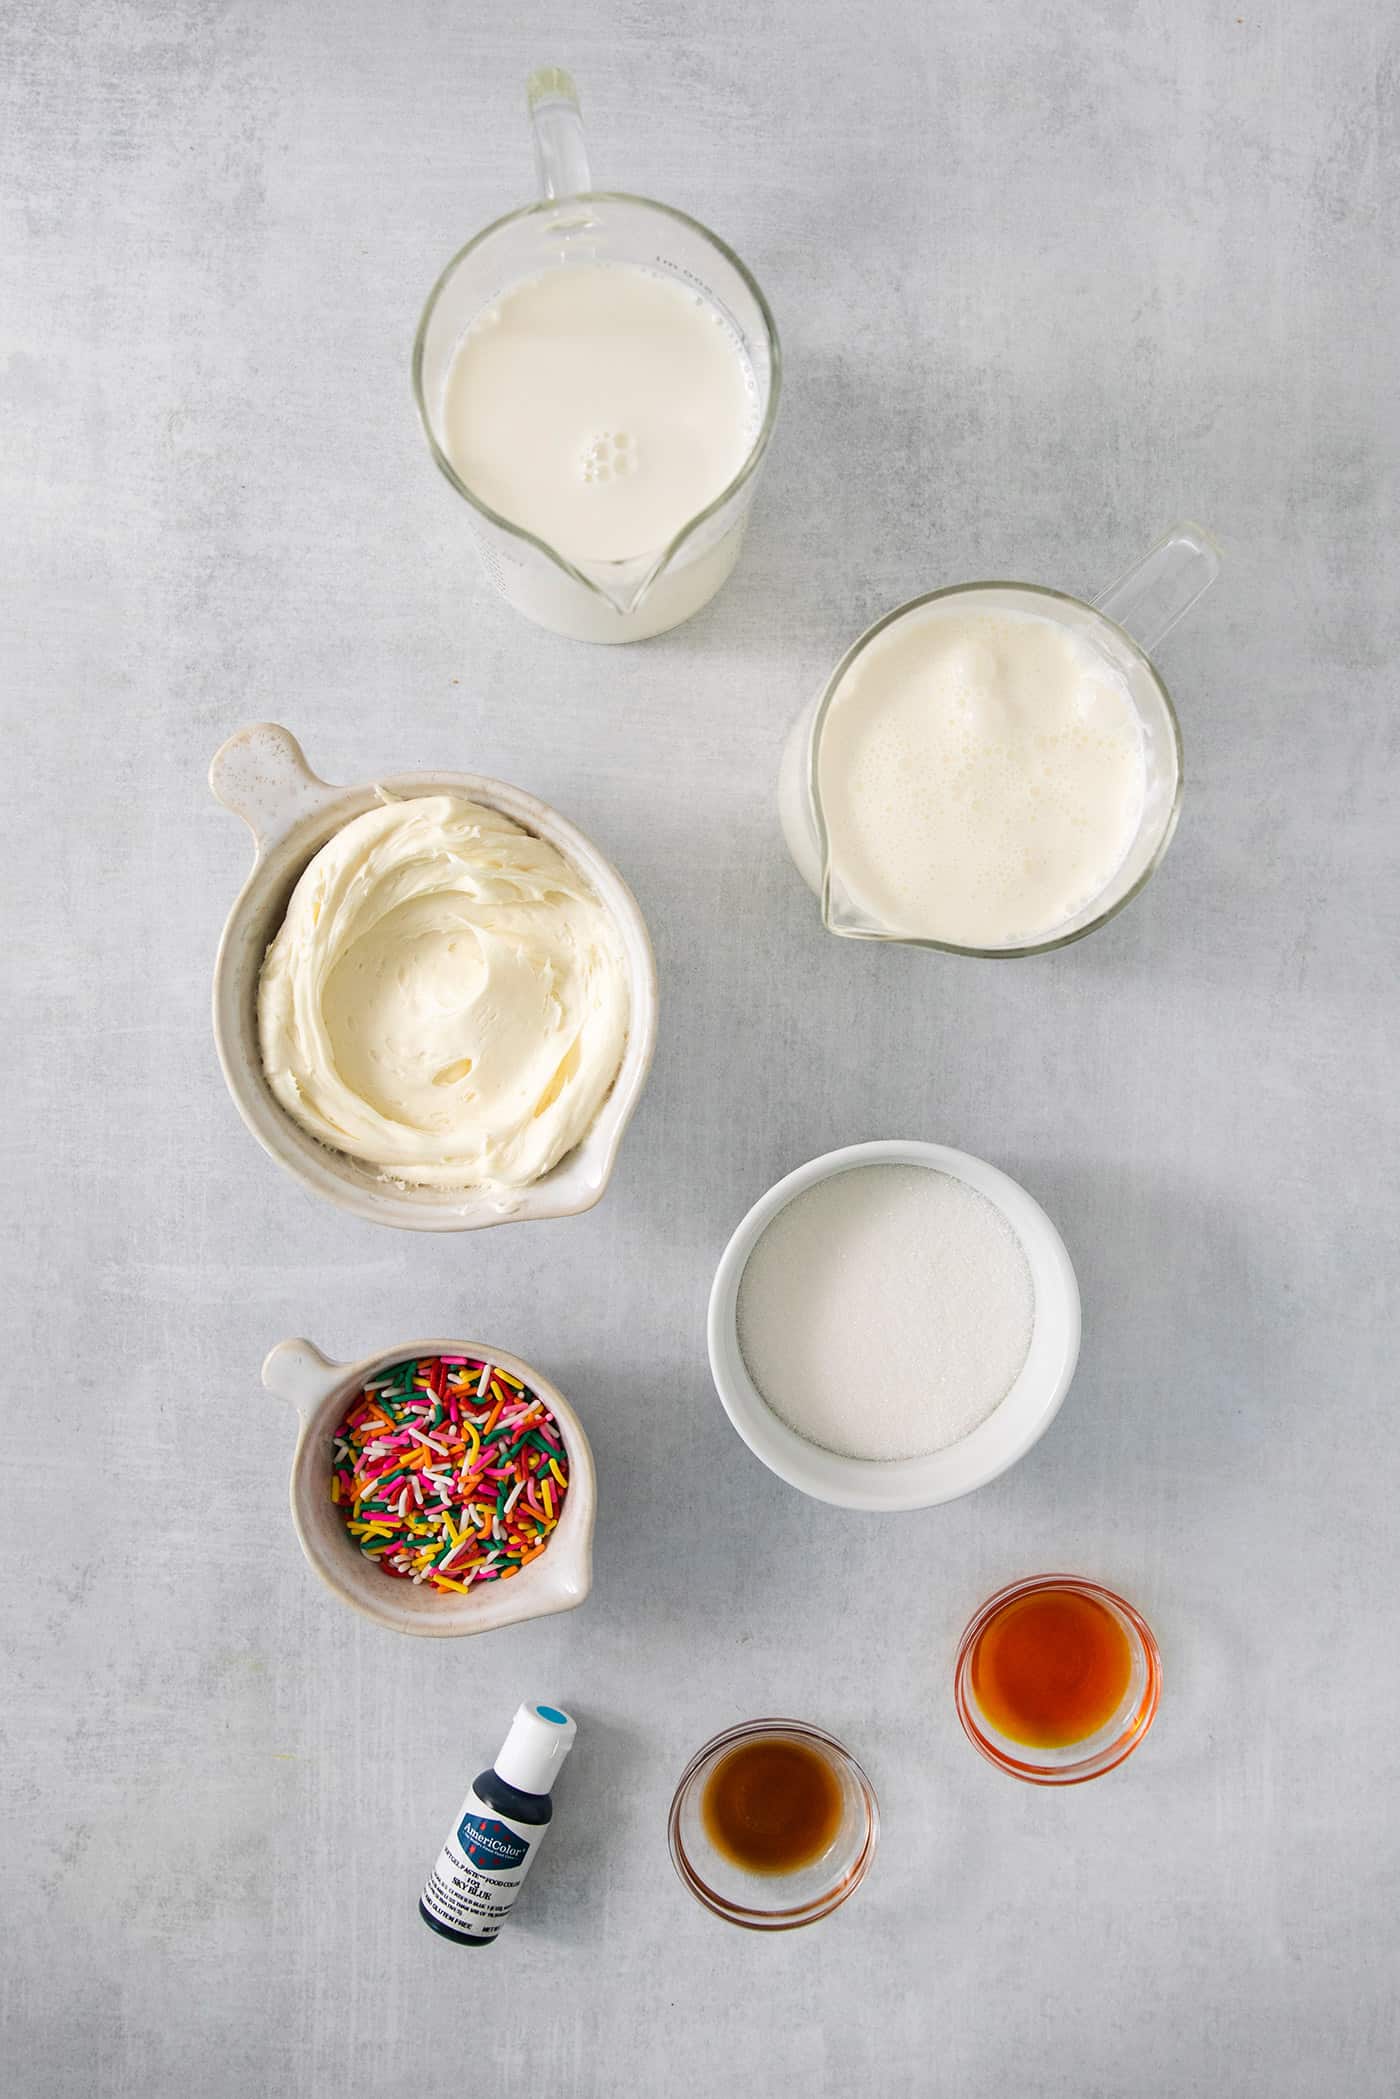 Ingredients for birthday cake ice cream: cream, sugar, flavoring, sprinkles, frosting, vanilla, and food coloring.